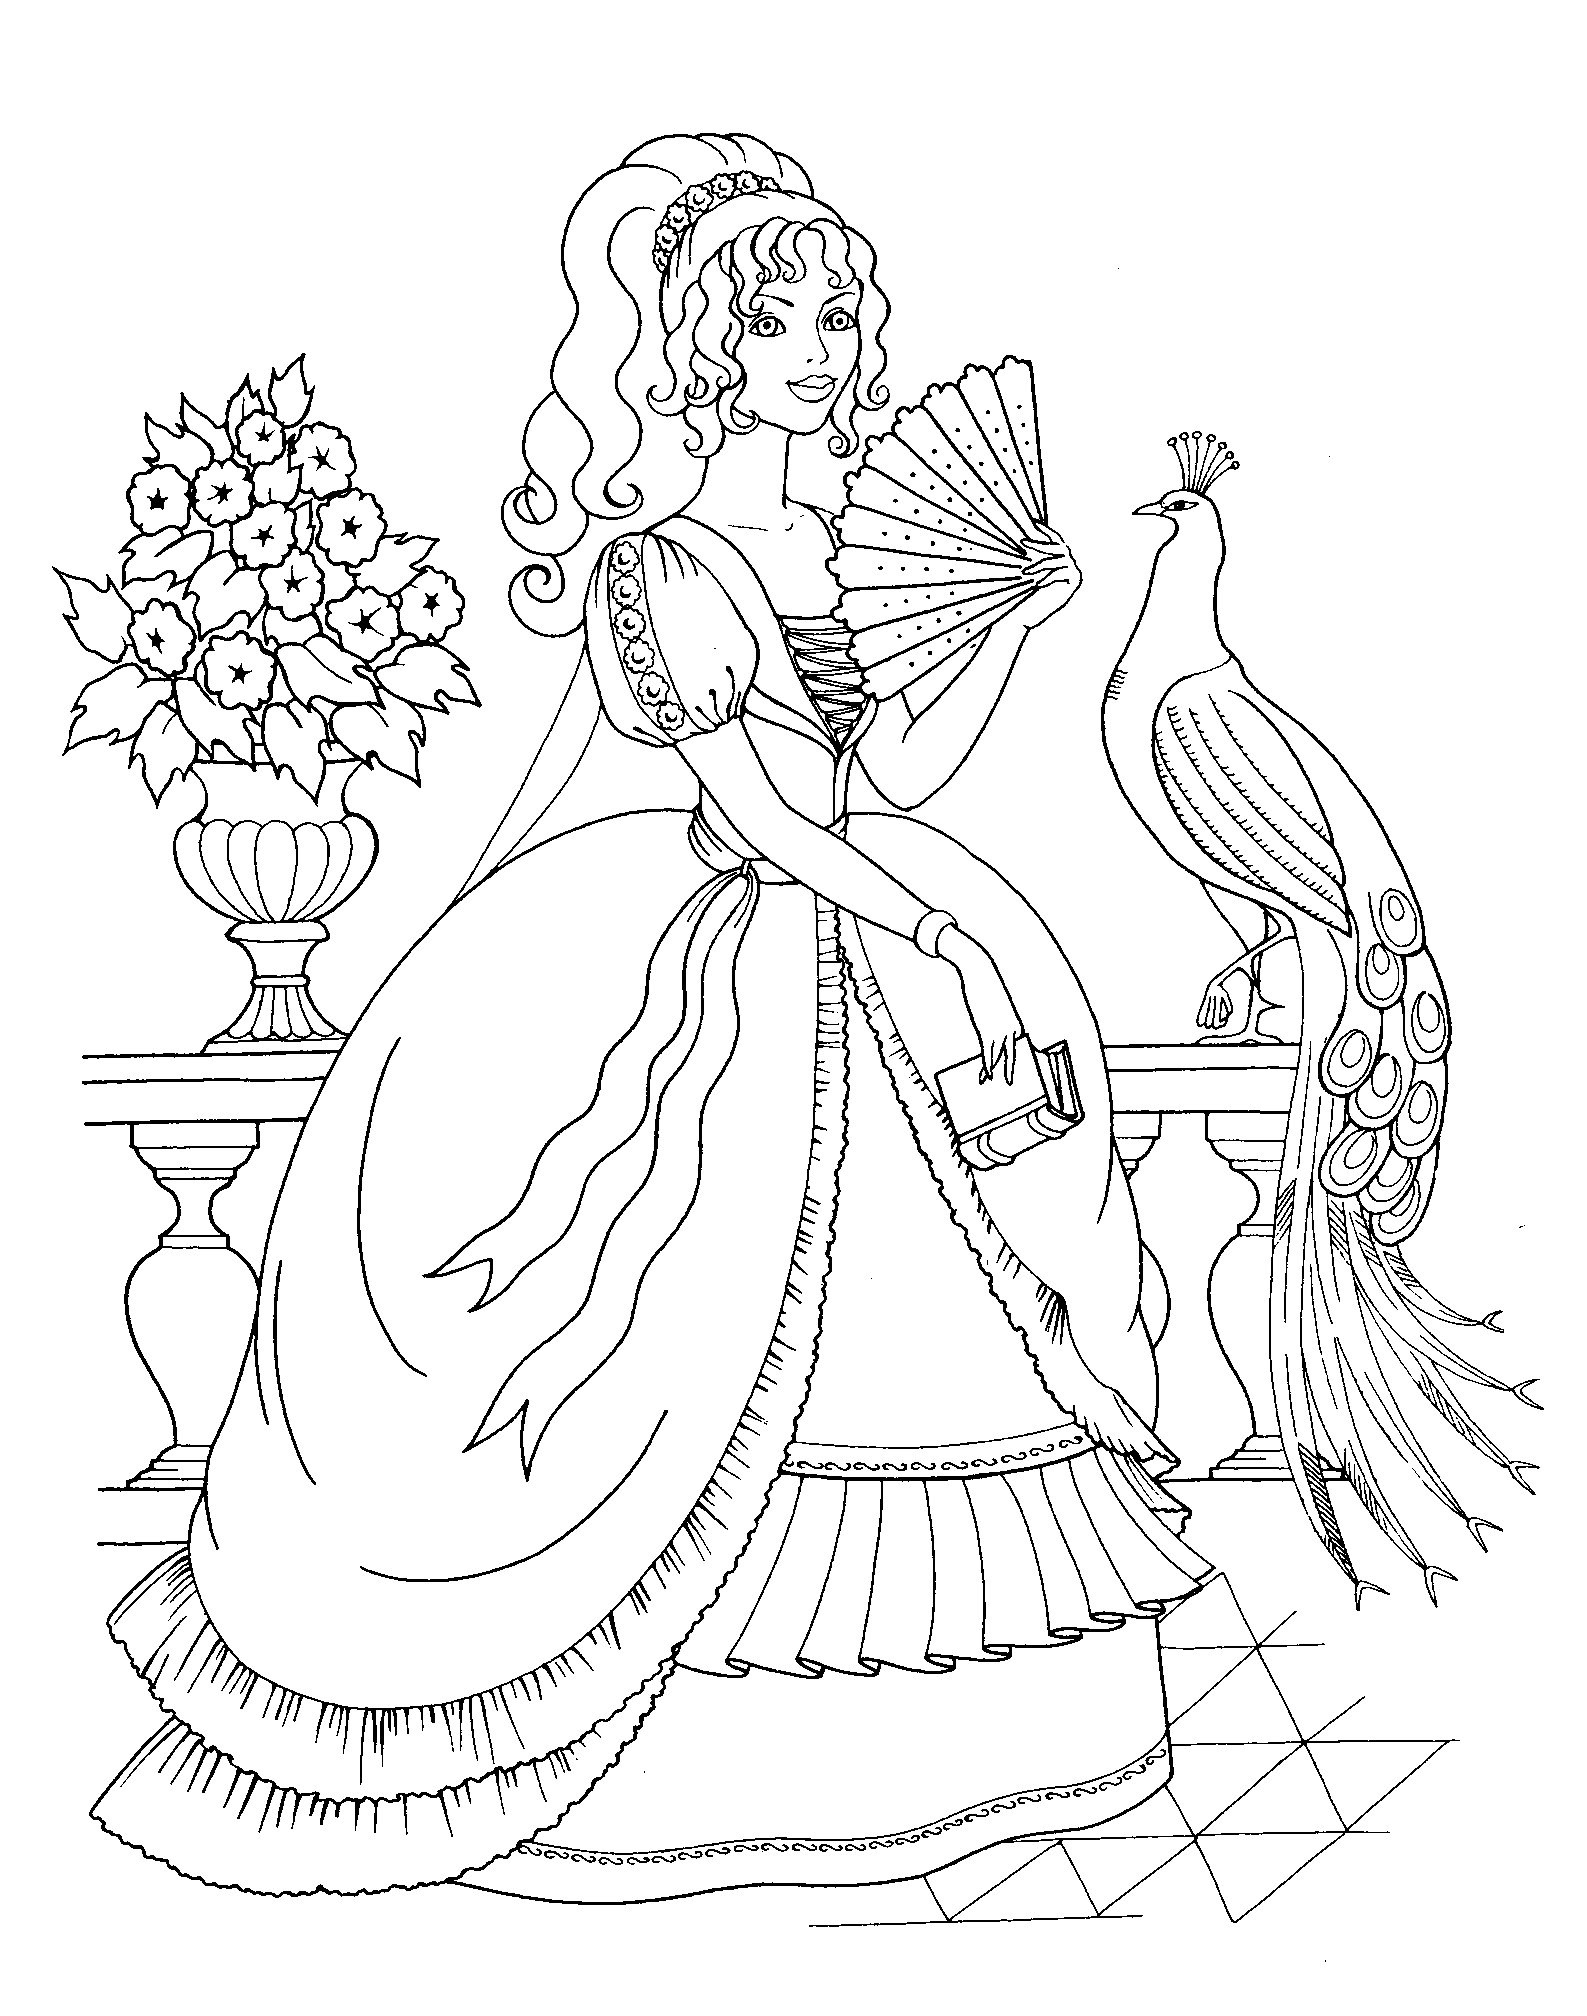 Free Princesses coloring page to download